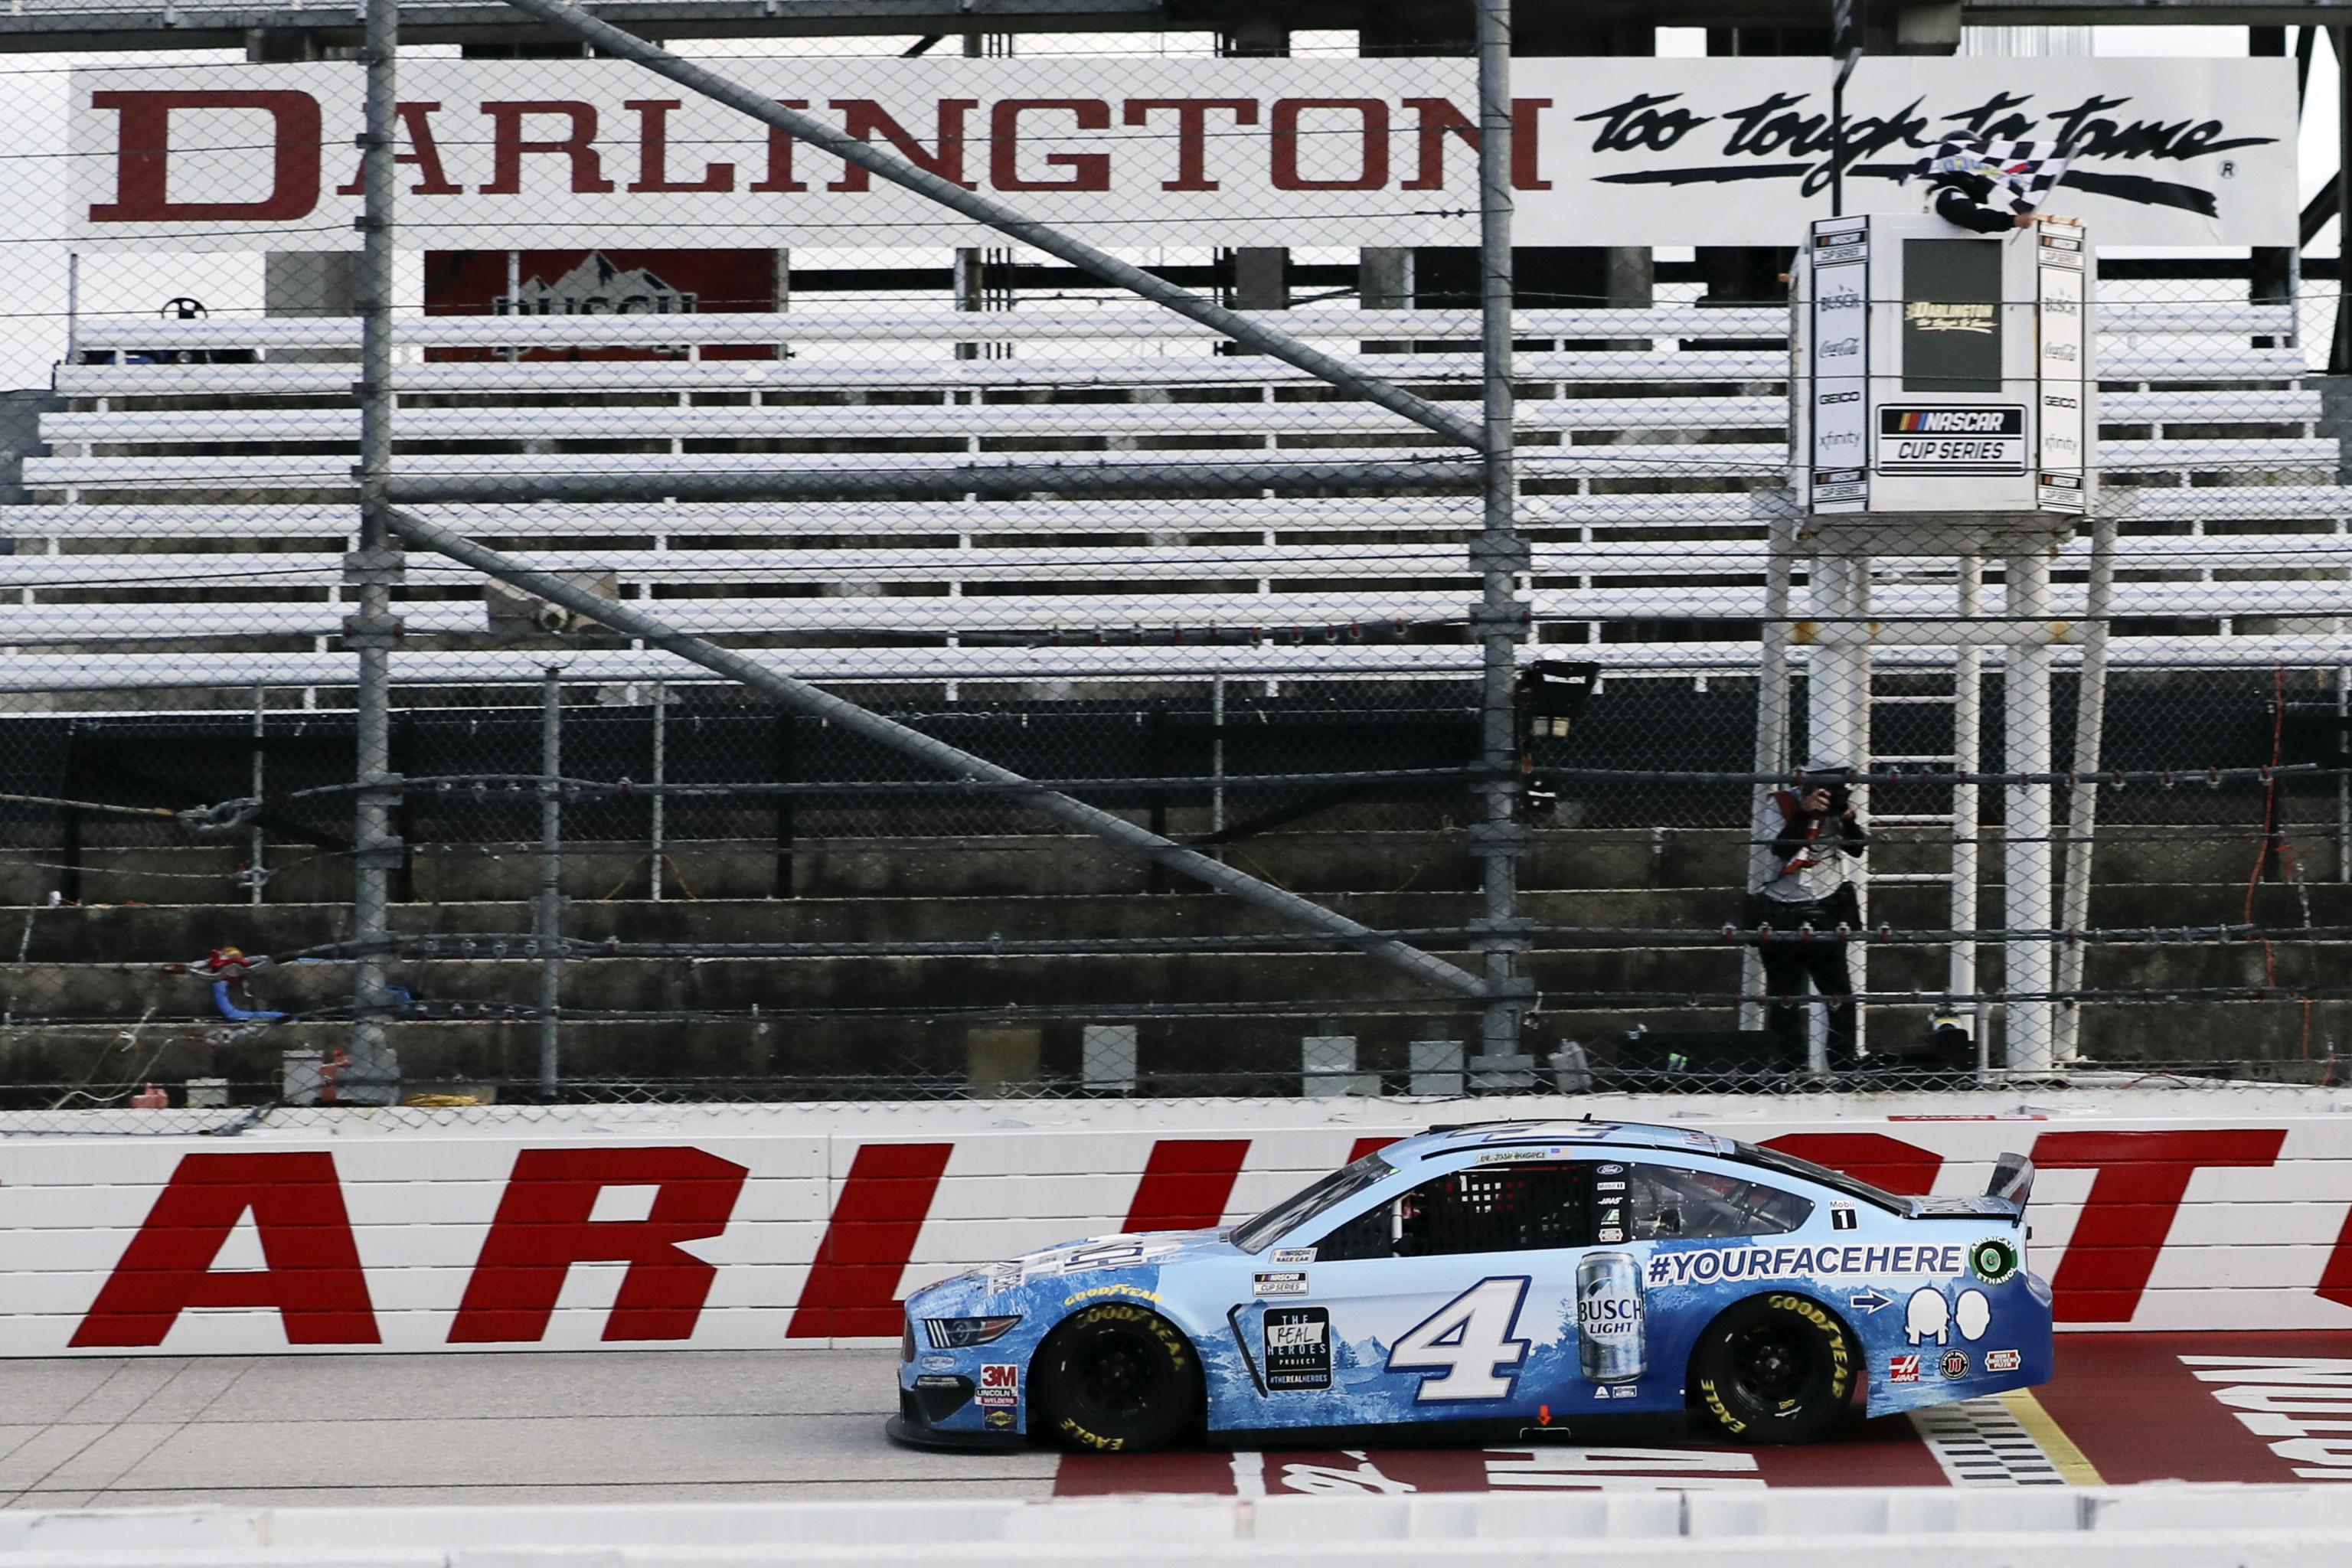 NASCAR at Darlington 2020: Odds, TV Schedule, Live Stream and Drivers